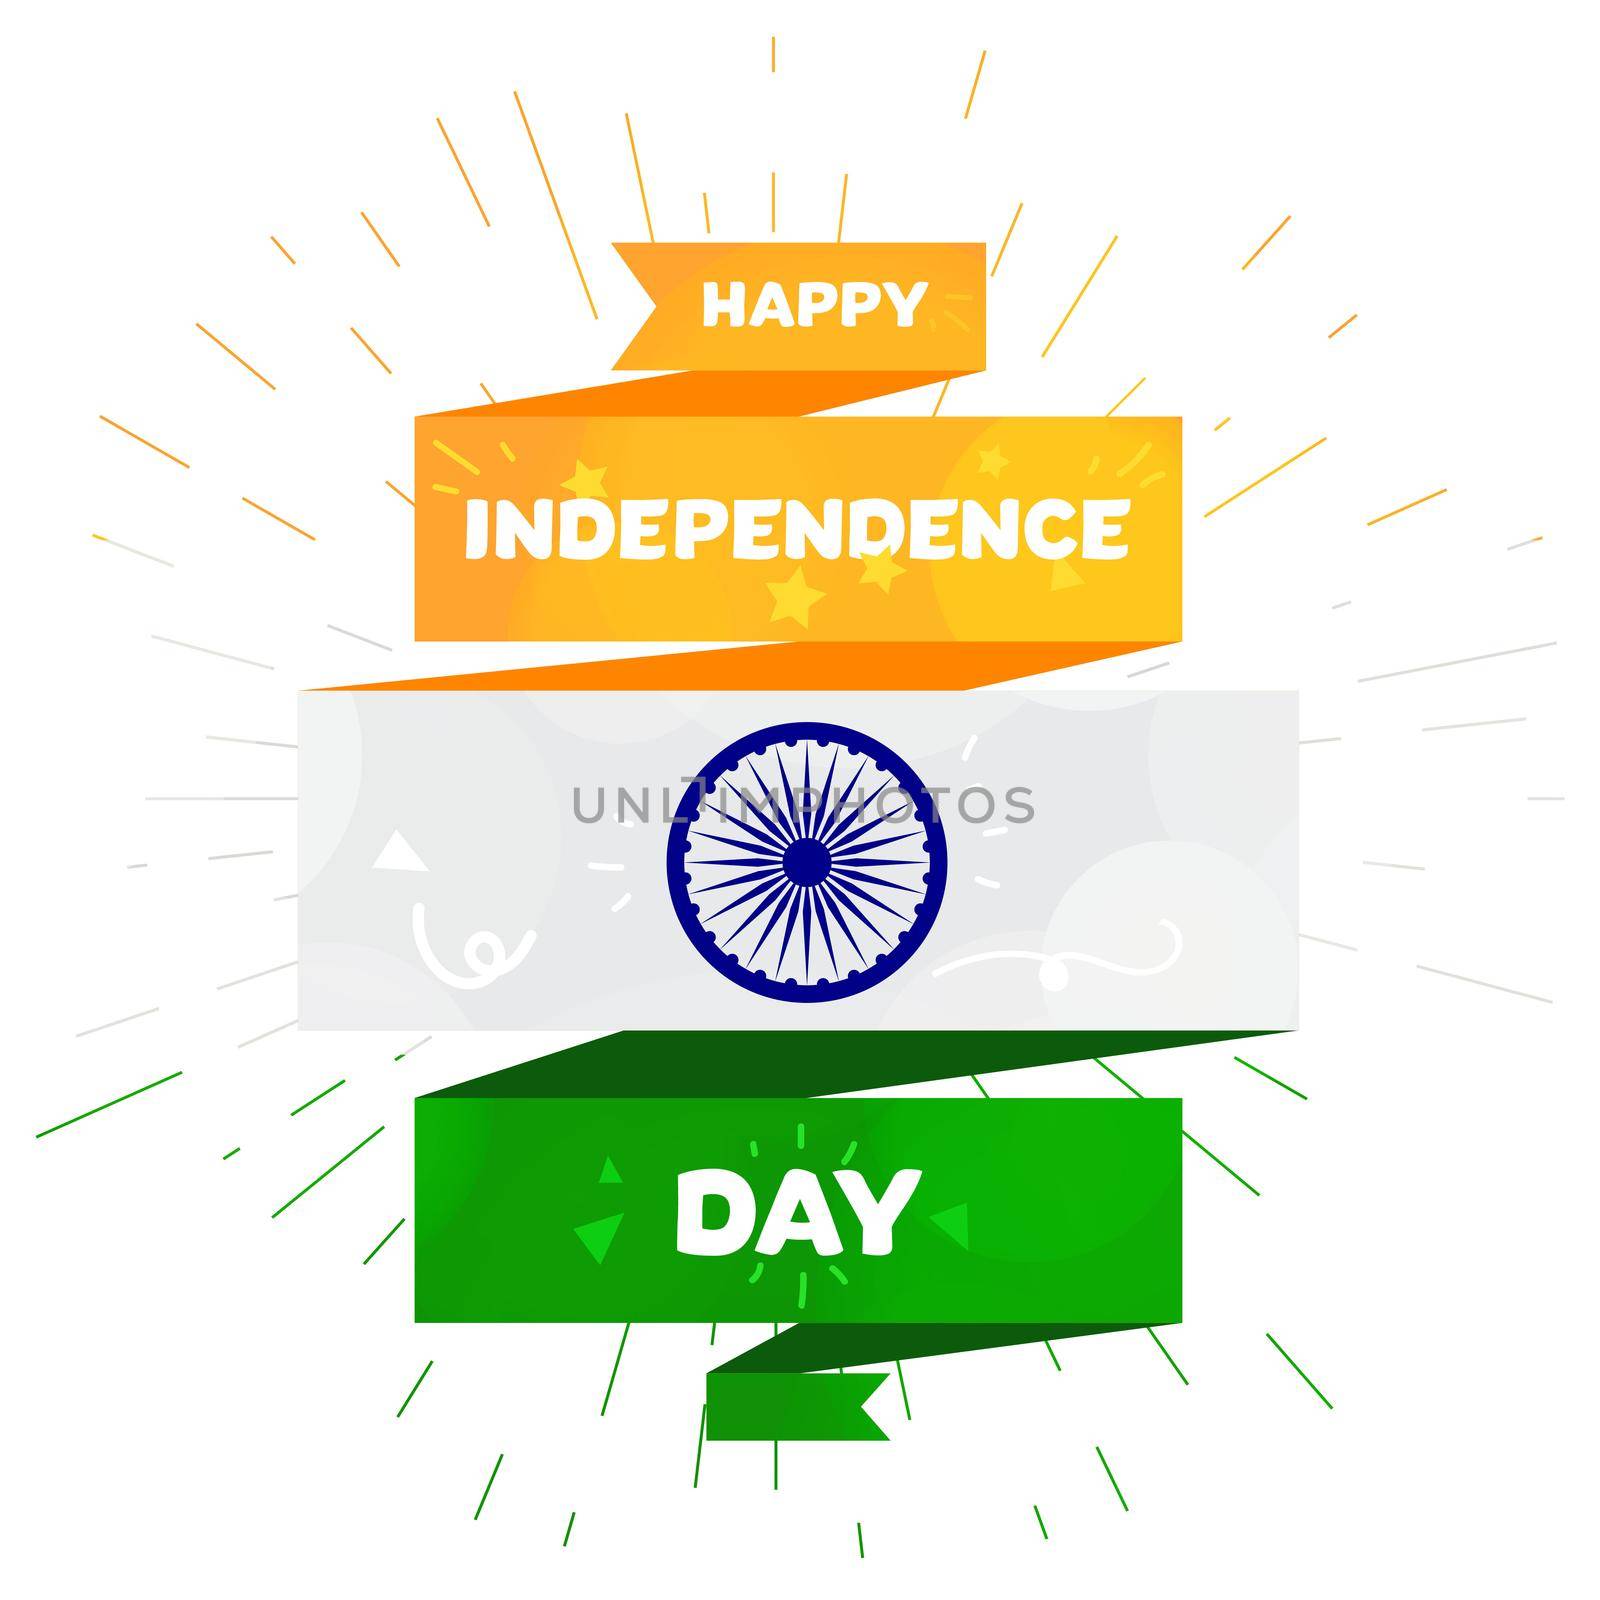 Happy Independence day India Greeting Template with Ashoka wheel. 15th of august. Design elements for print, card, banner, celebration. Vector